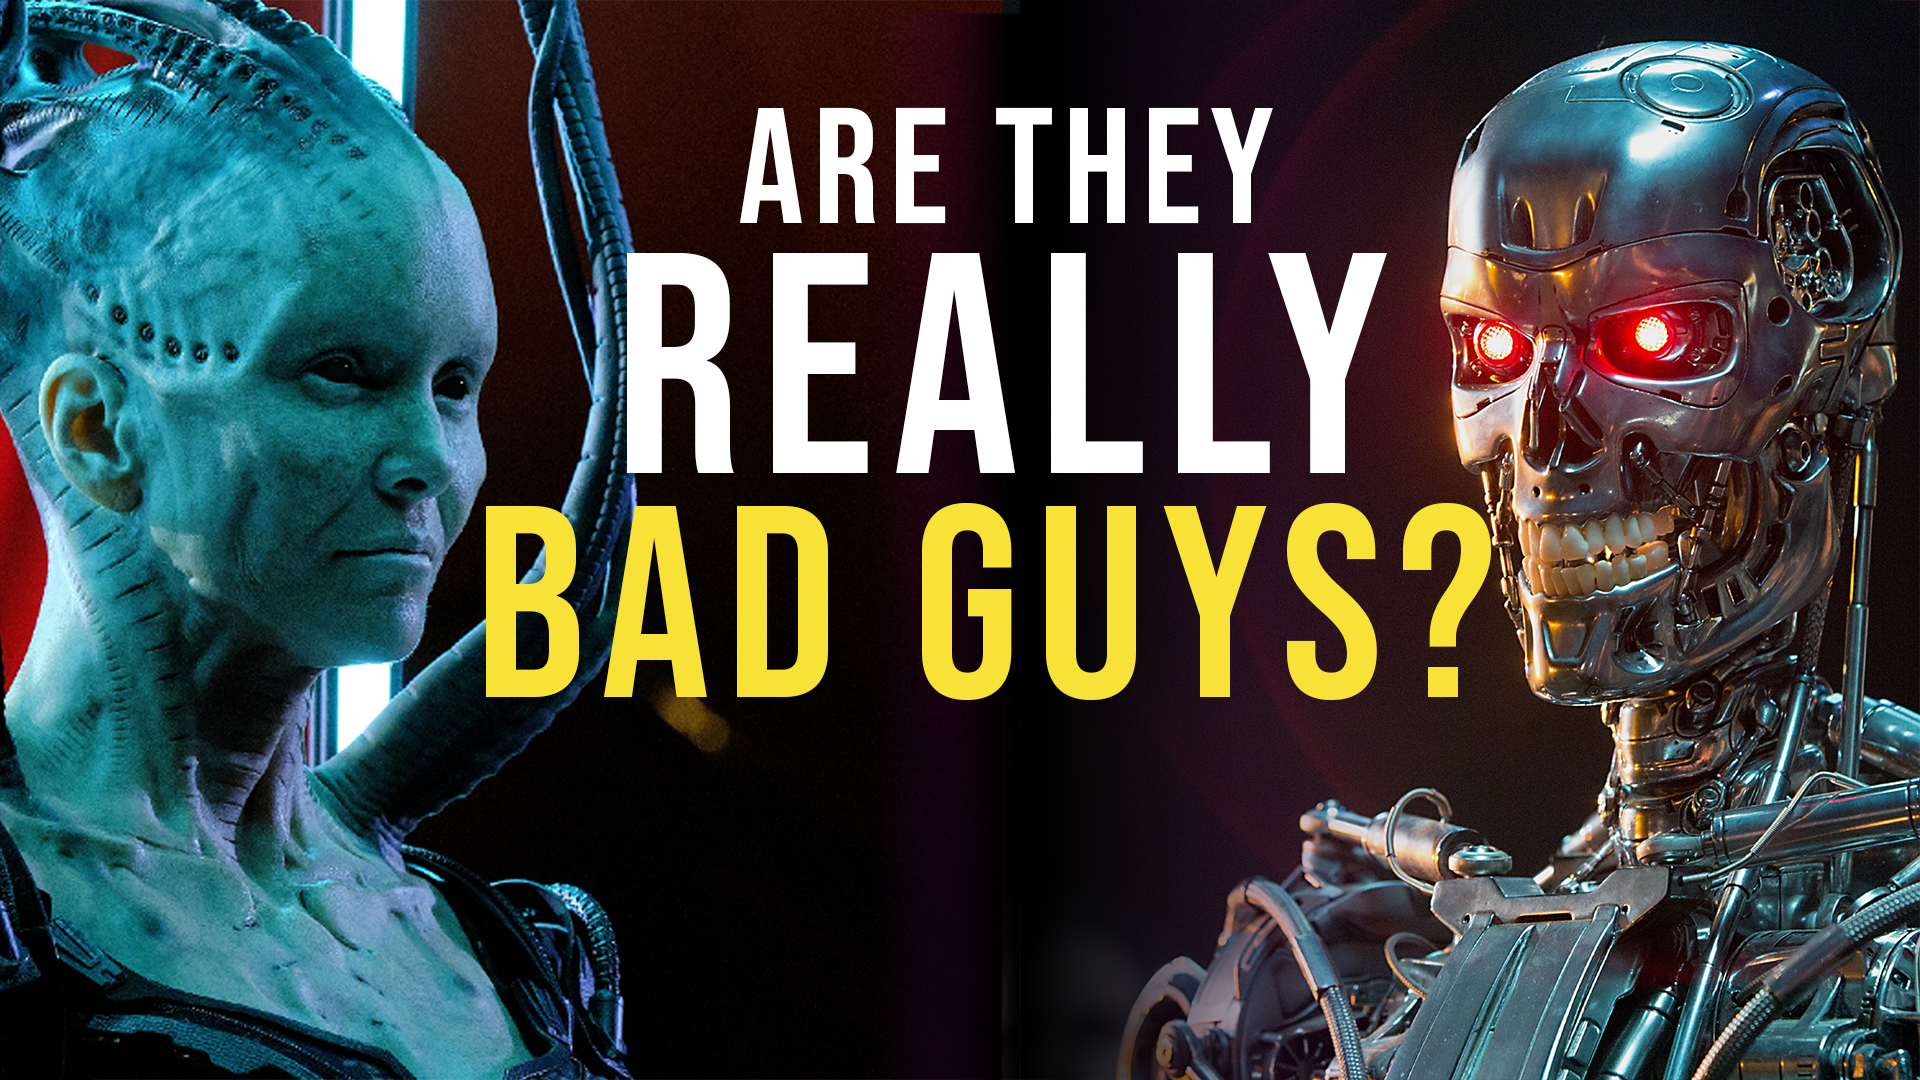 are the borg and terminators really evil?